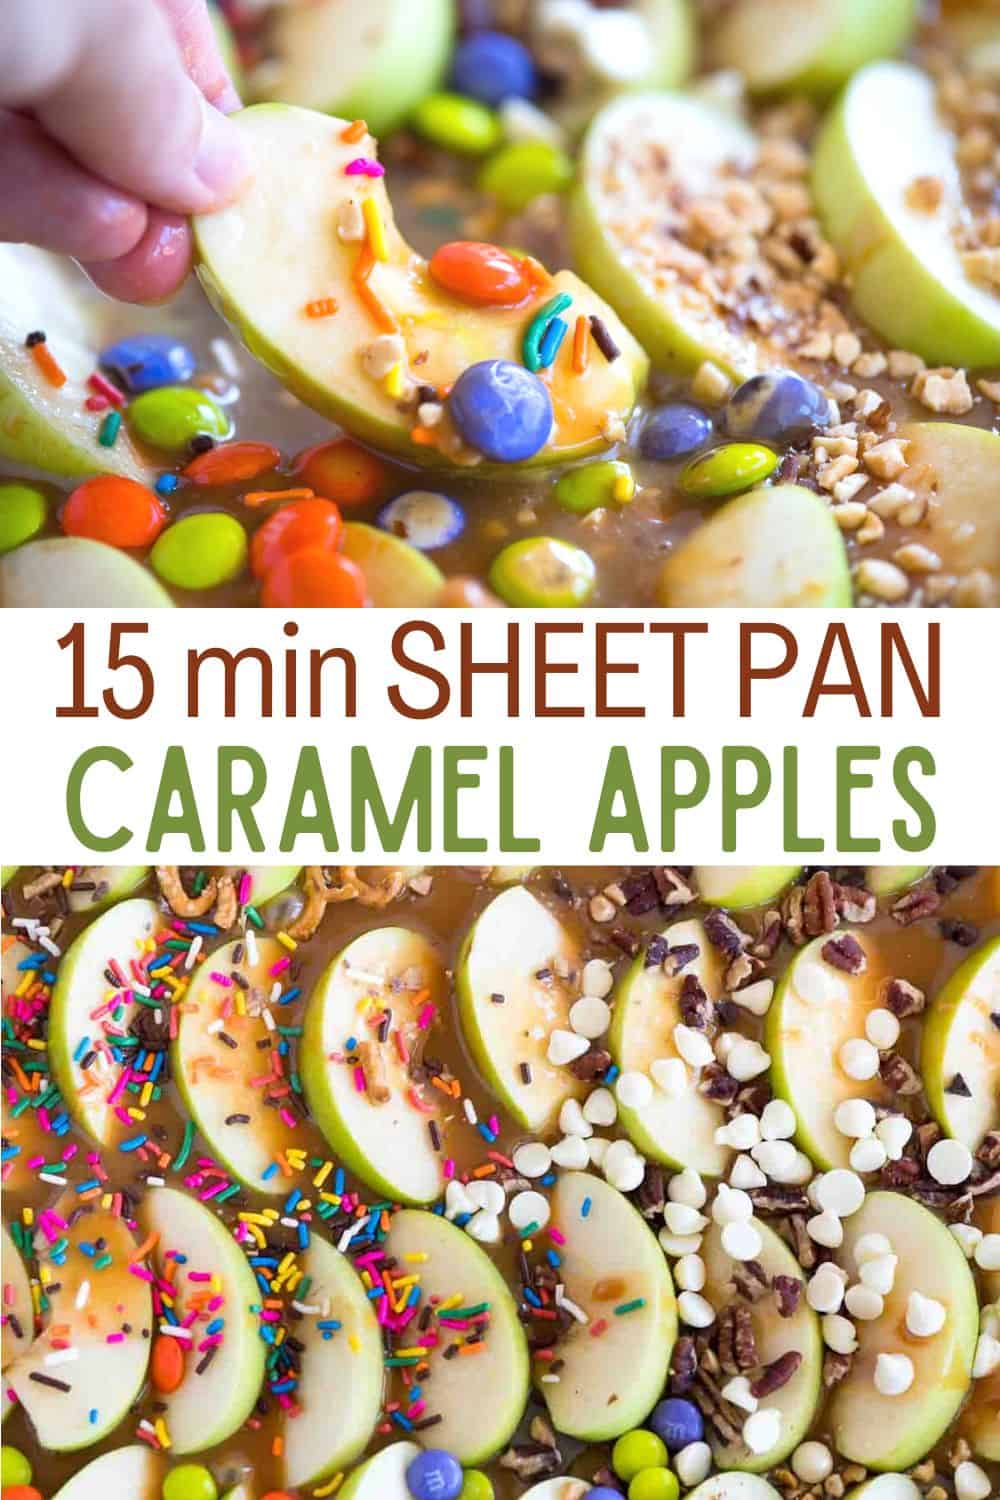 Sheet pan caramel apples is the easiest way to enjoy this classic fall favorite. The apples are already sliced and ready to eat with caramel sauce and delicious toppings!